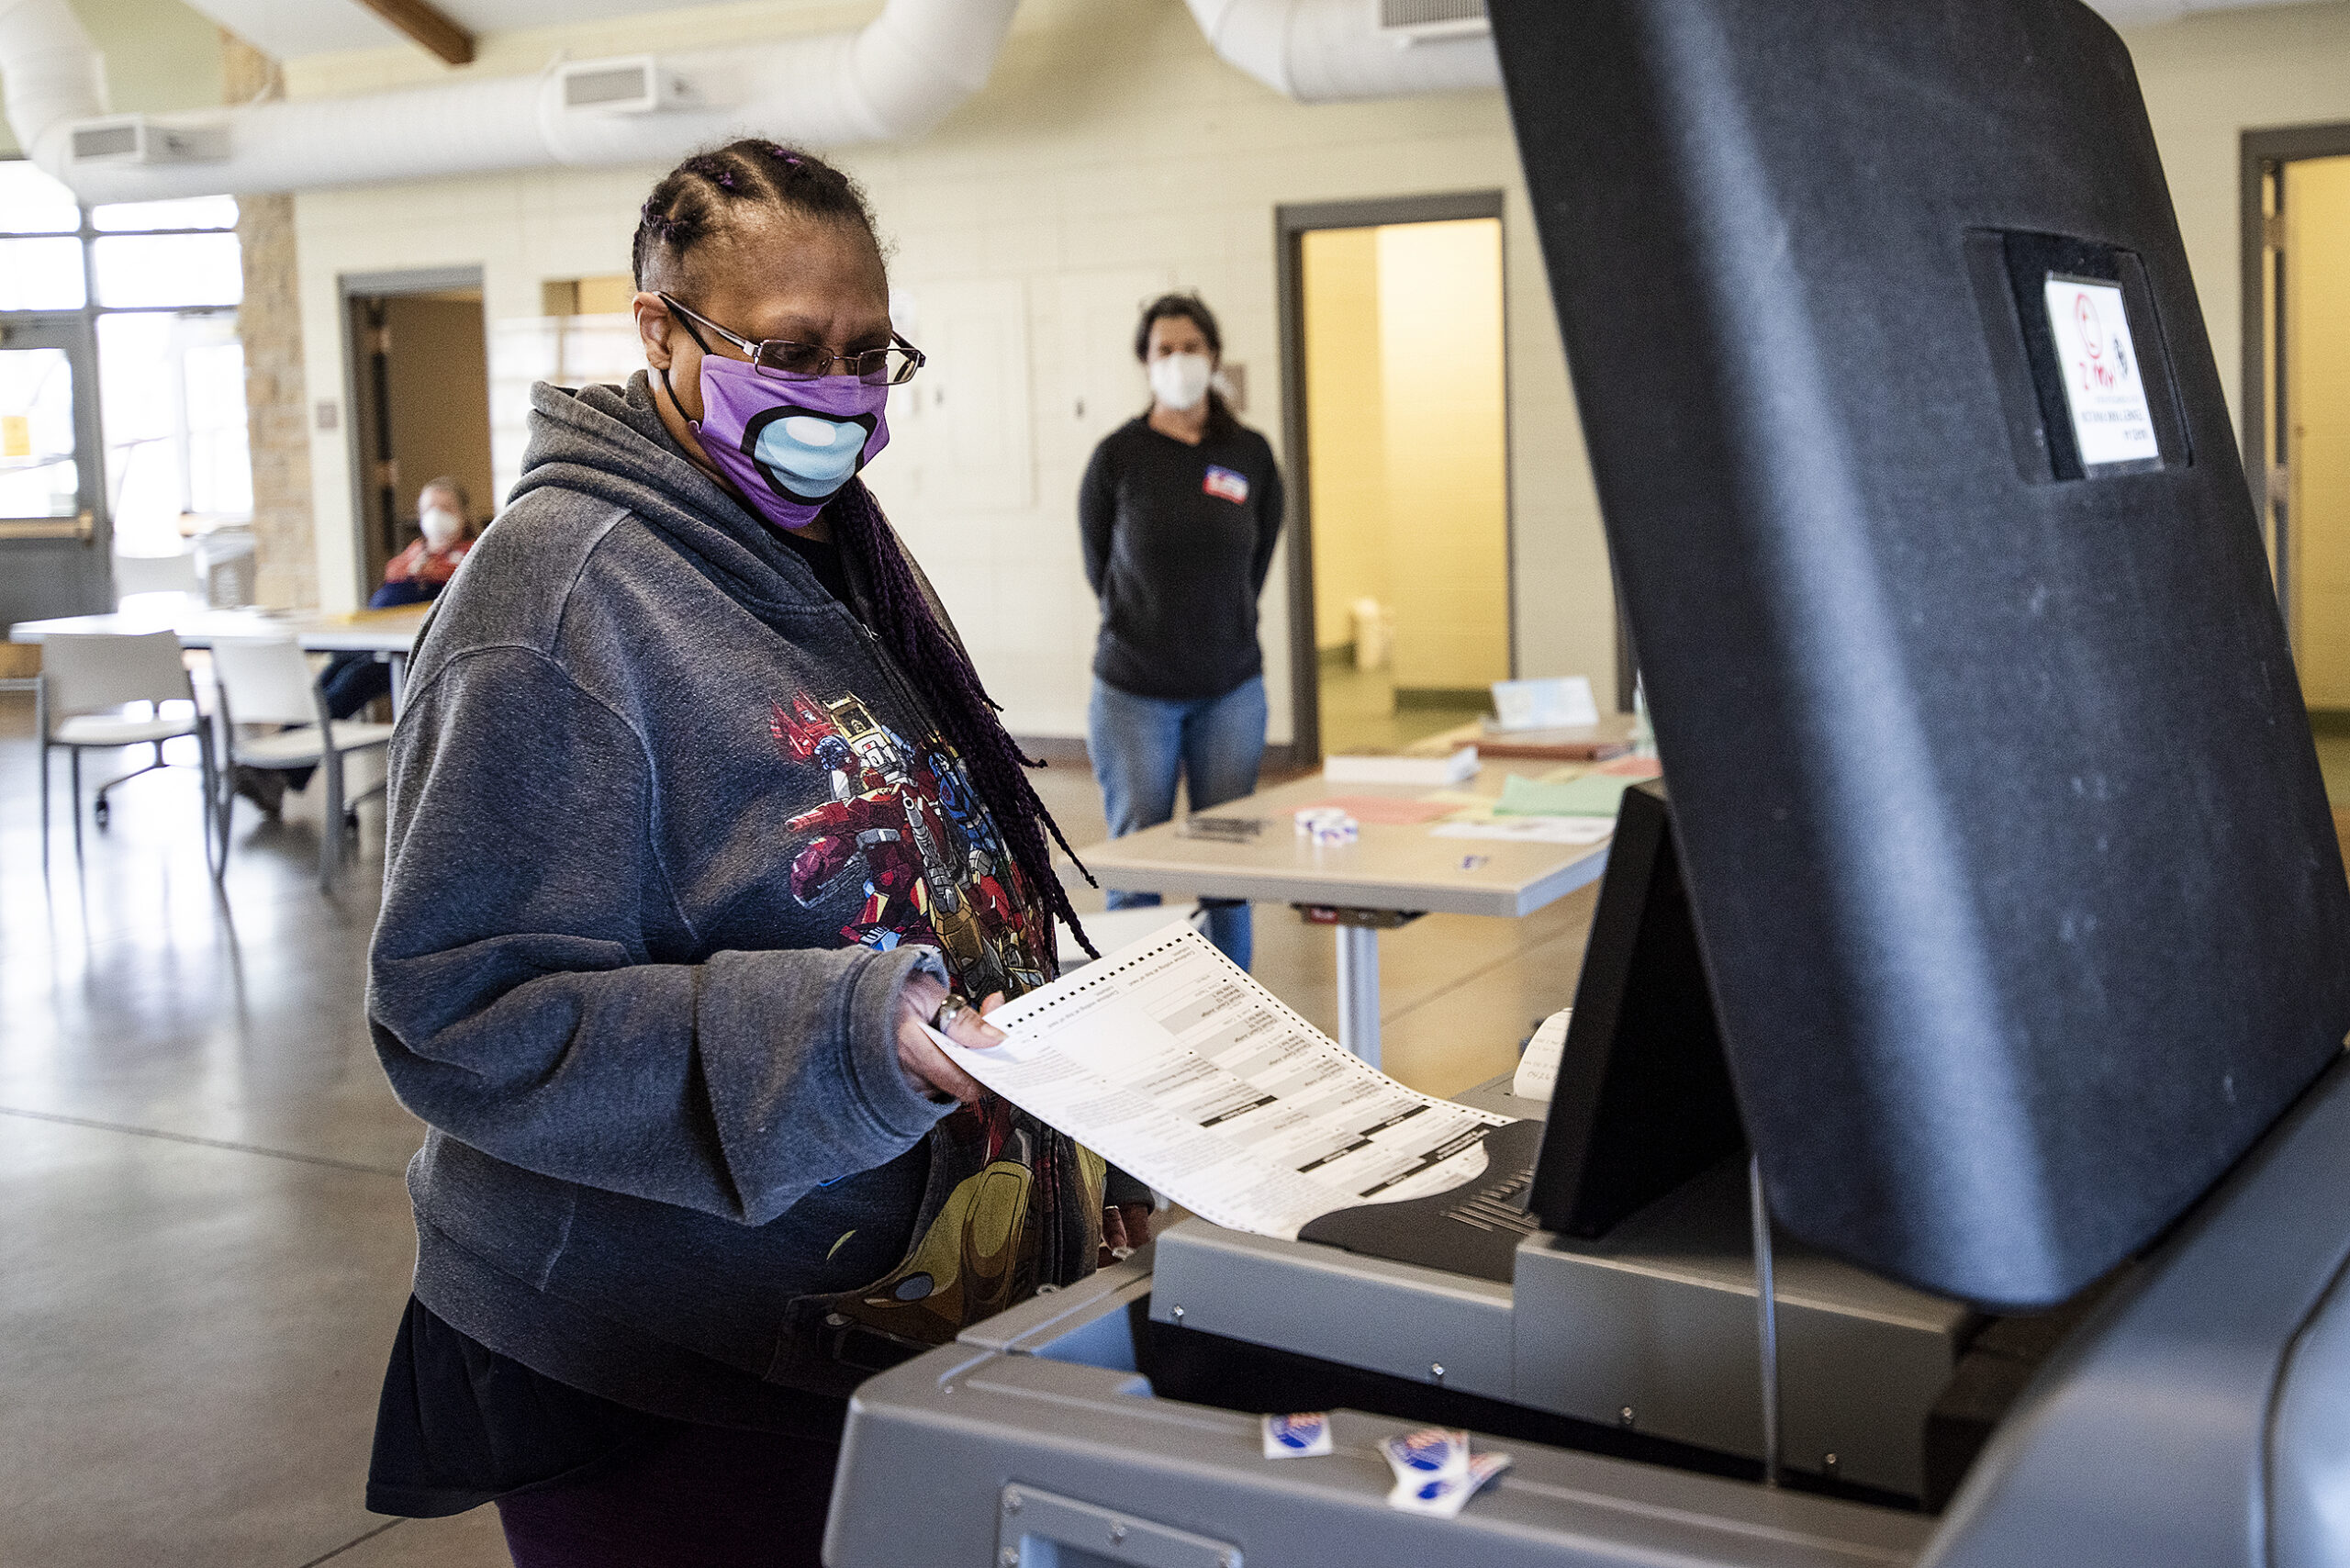 A voter in a face mask puts a ballot into the machine.